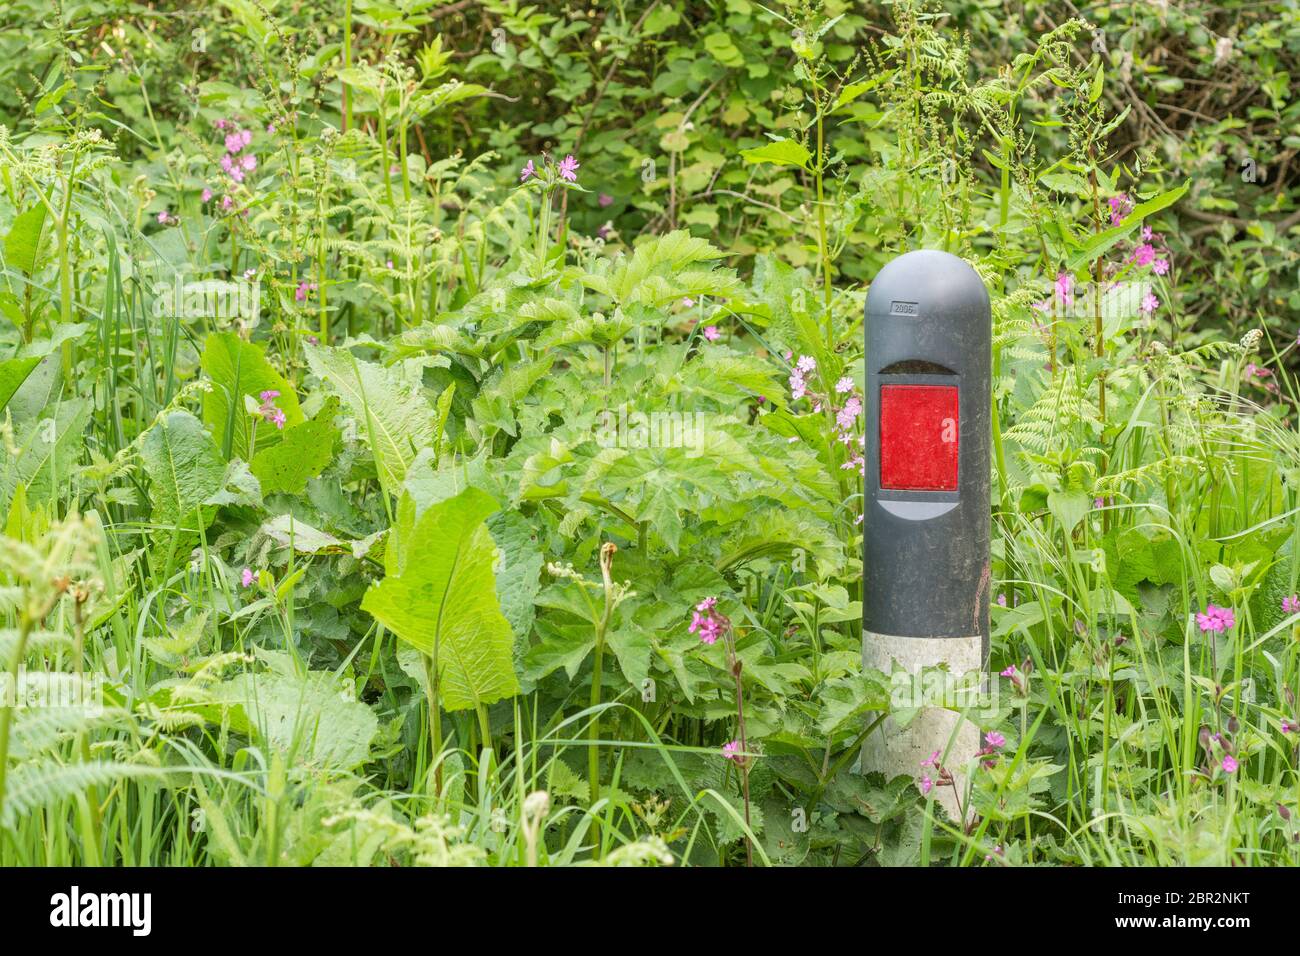 Mass of roadside weeds engulfing reflective marker post in grass verge of country road  Metaphor overgrown, swamped, weeds, surrounded on all sides Stock Photo